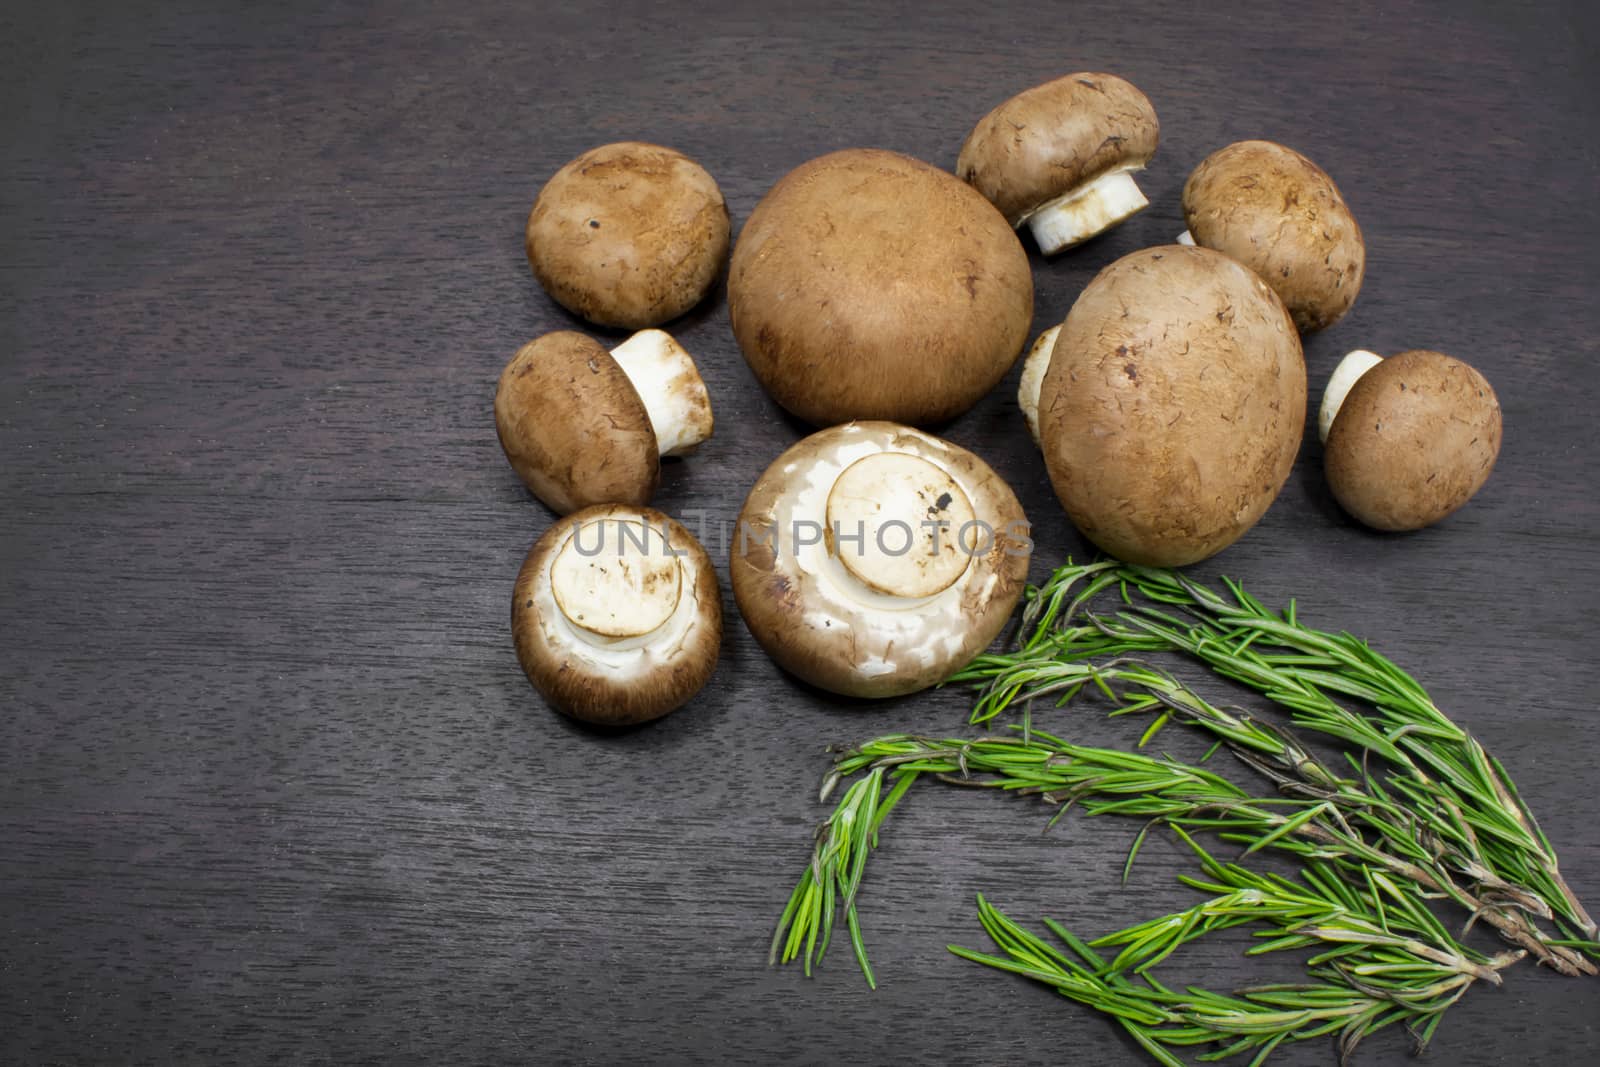 Champignon Mushrooms and Rosemary on a Cutting Board